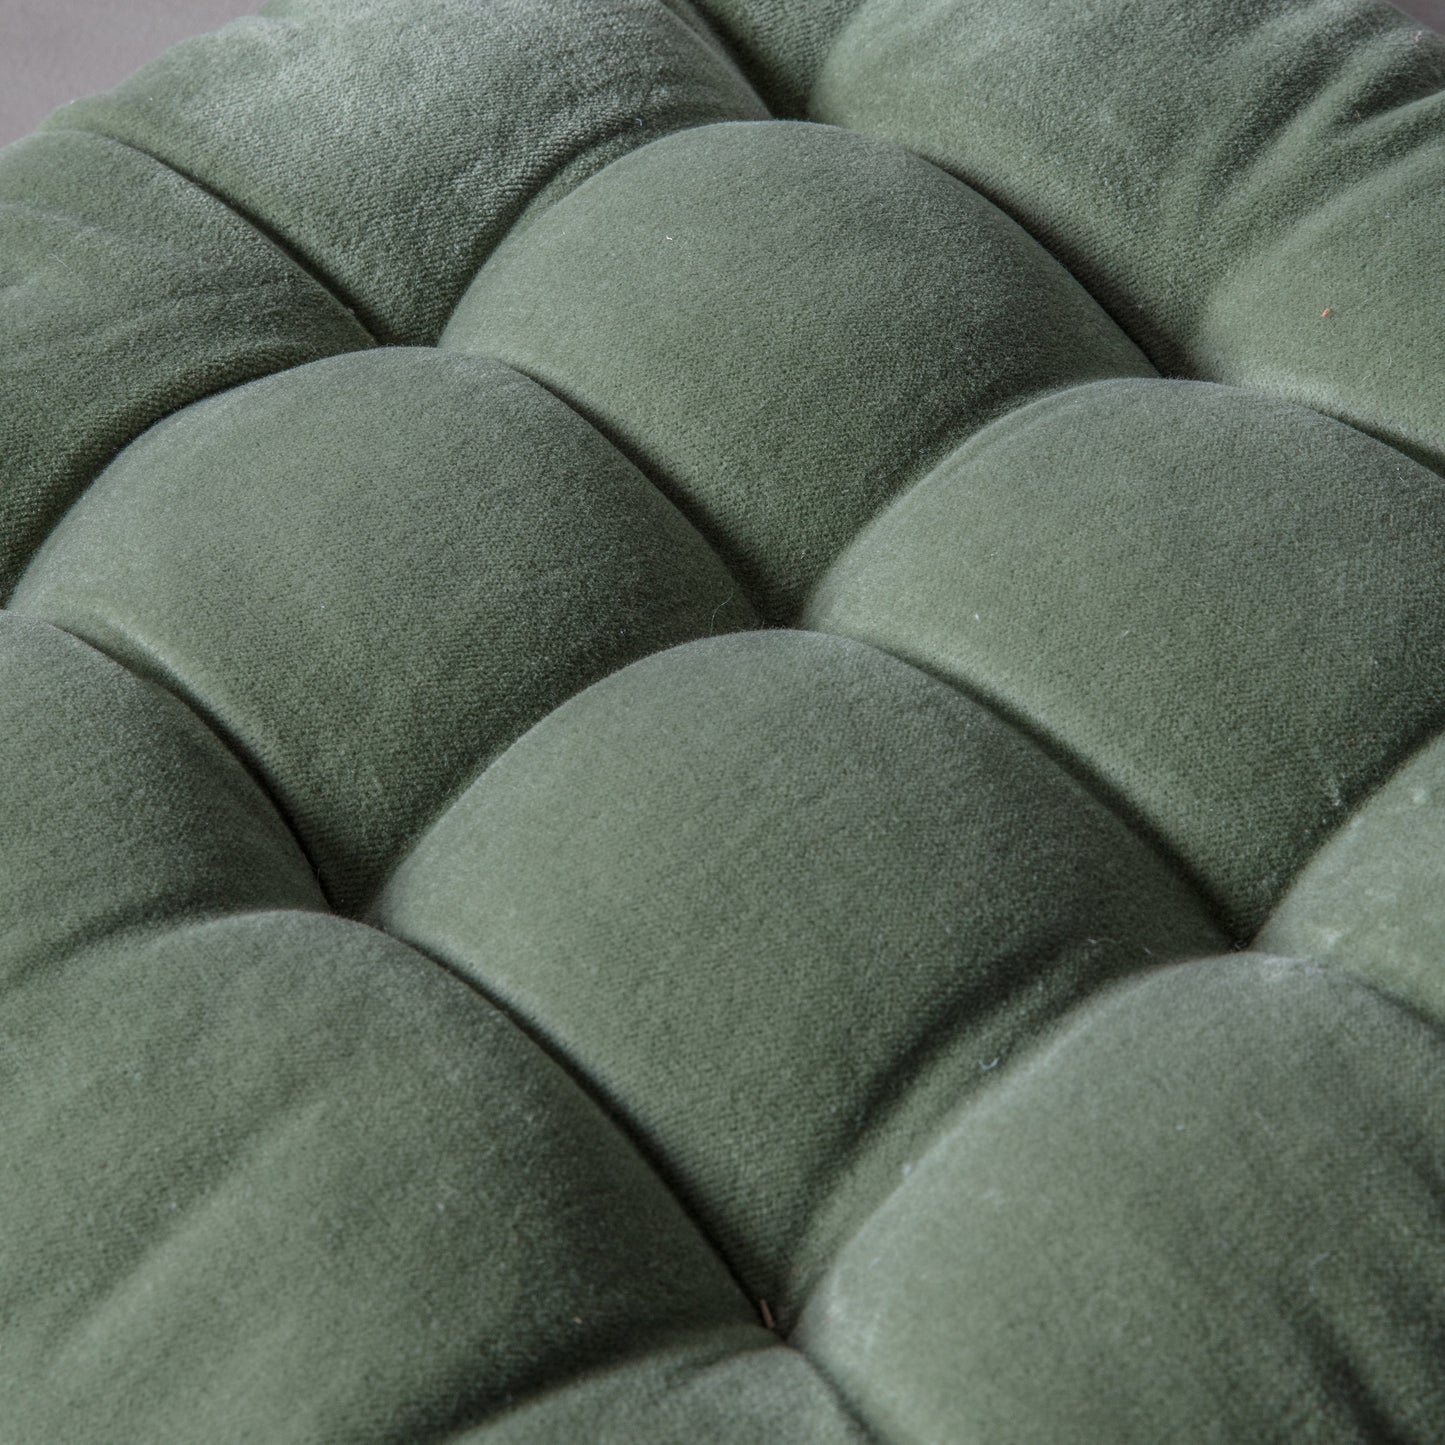 A close up of a cotton velvet seatpad cushion from Kikiathome.co.uk for interior decor.